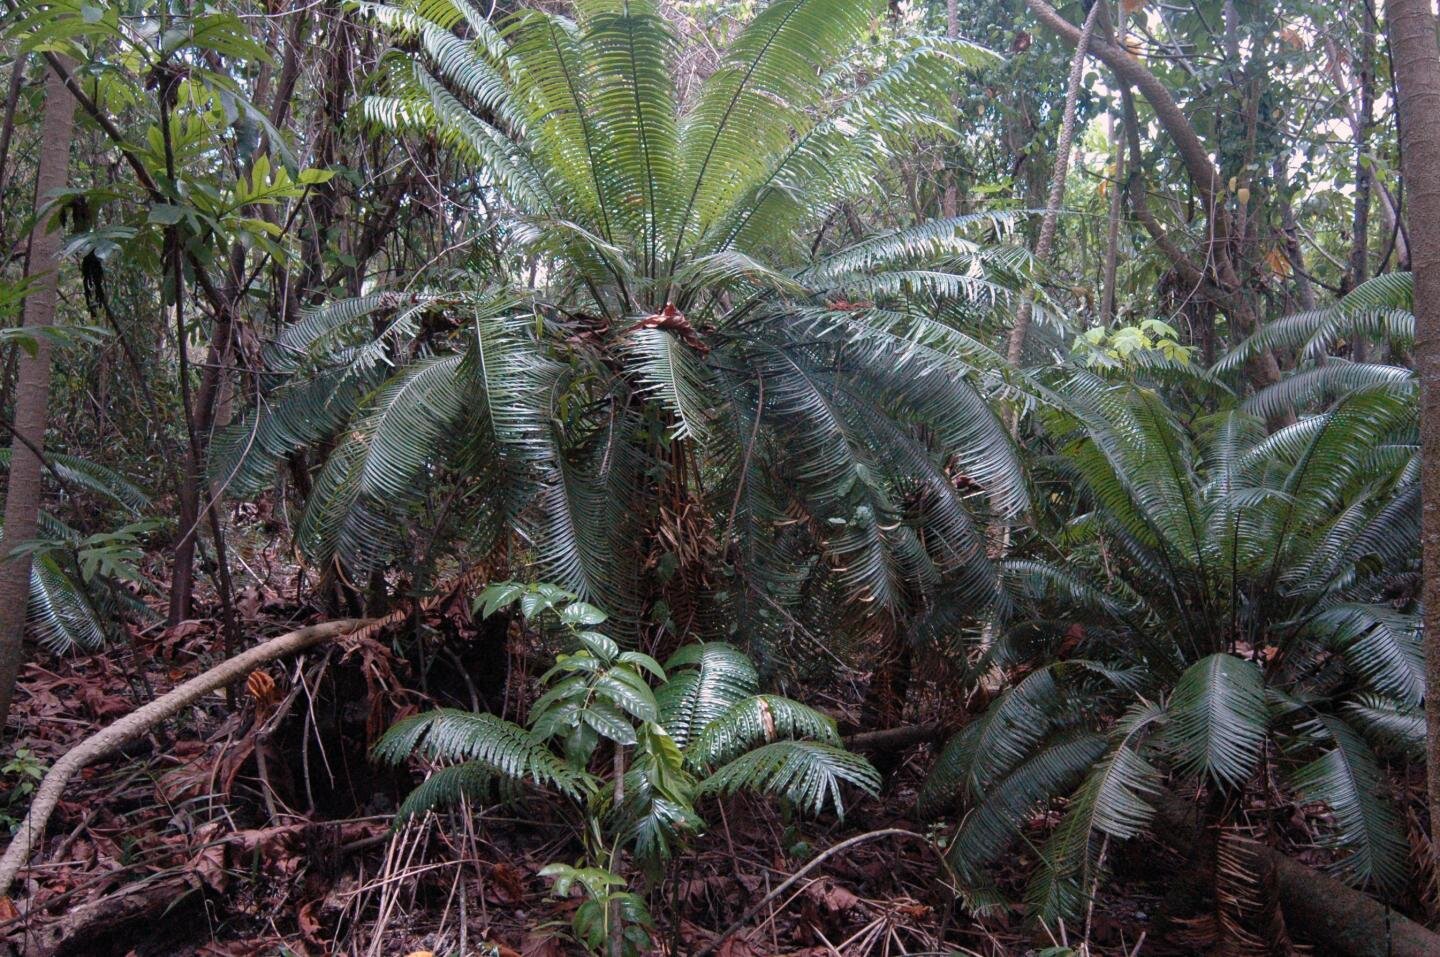 Cycad plants provide an important 'ecosystem service'